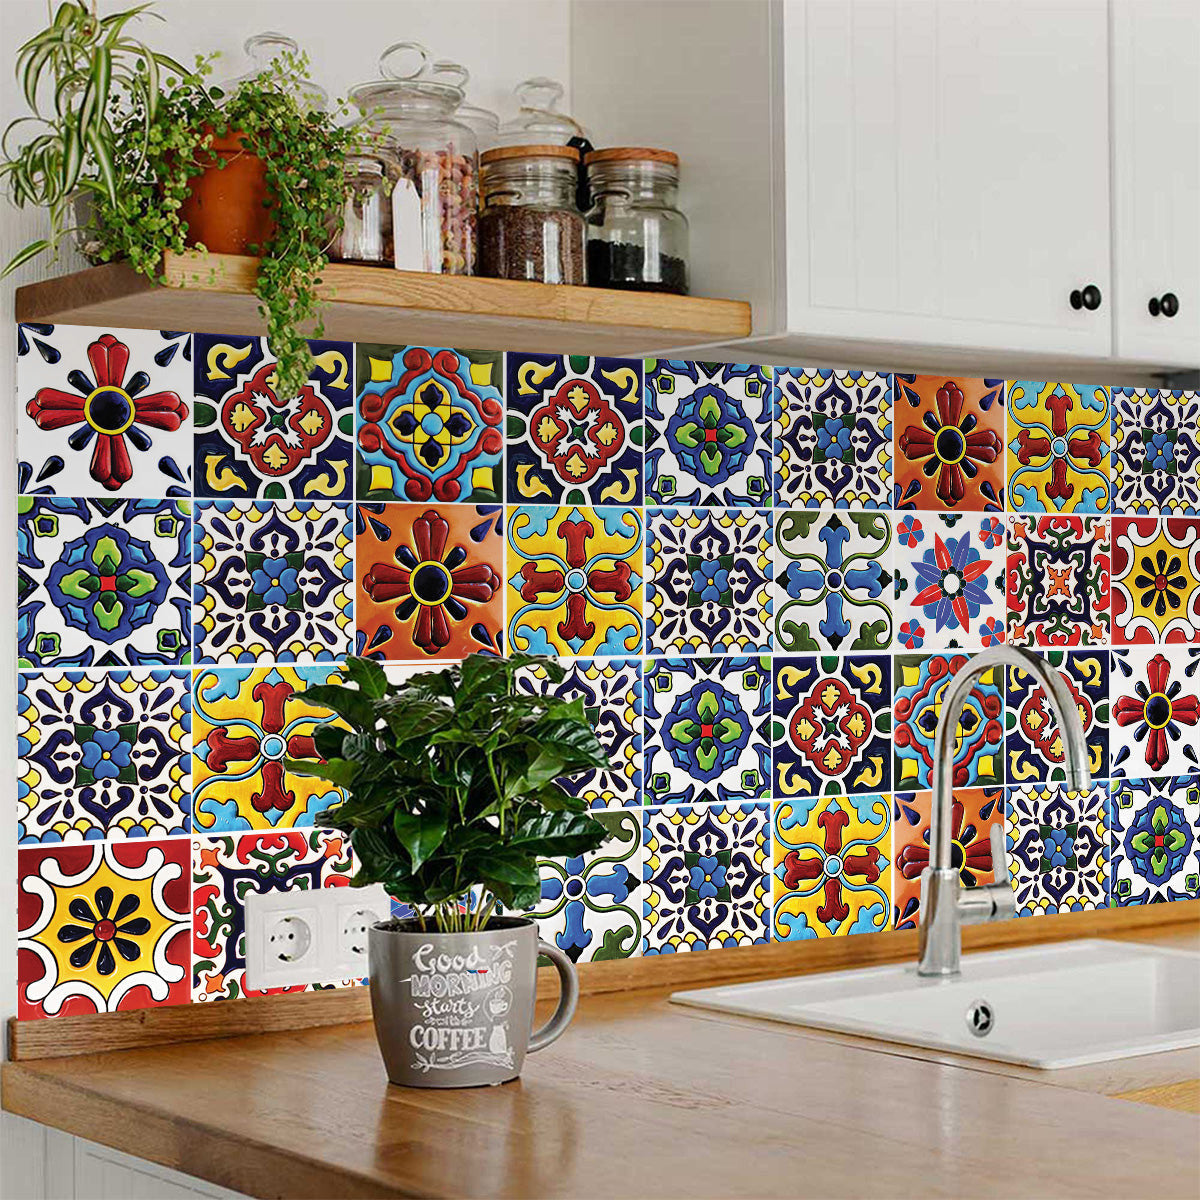 4" X 4" Festival Brights Mosaic Peel And Stick Removable Tiles